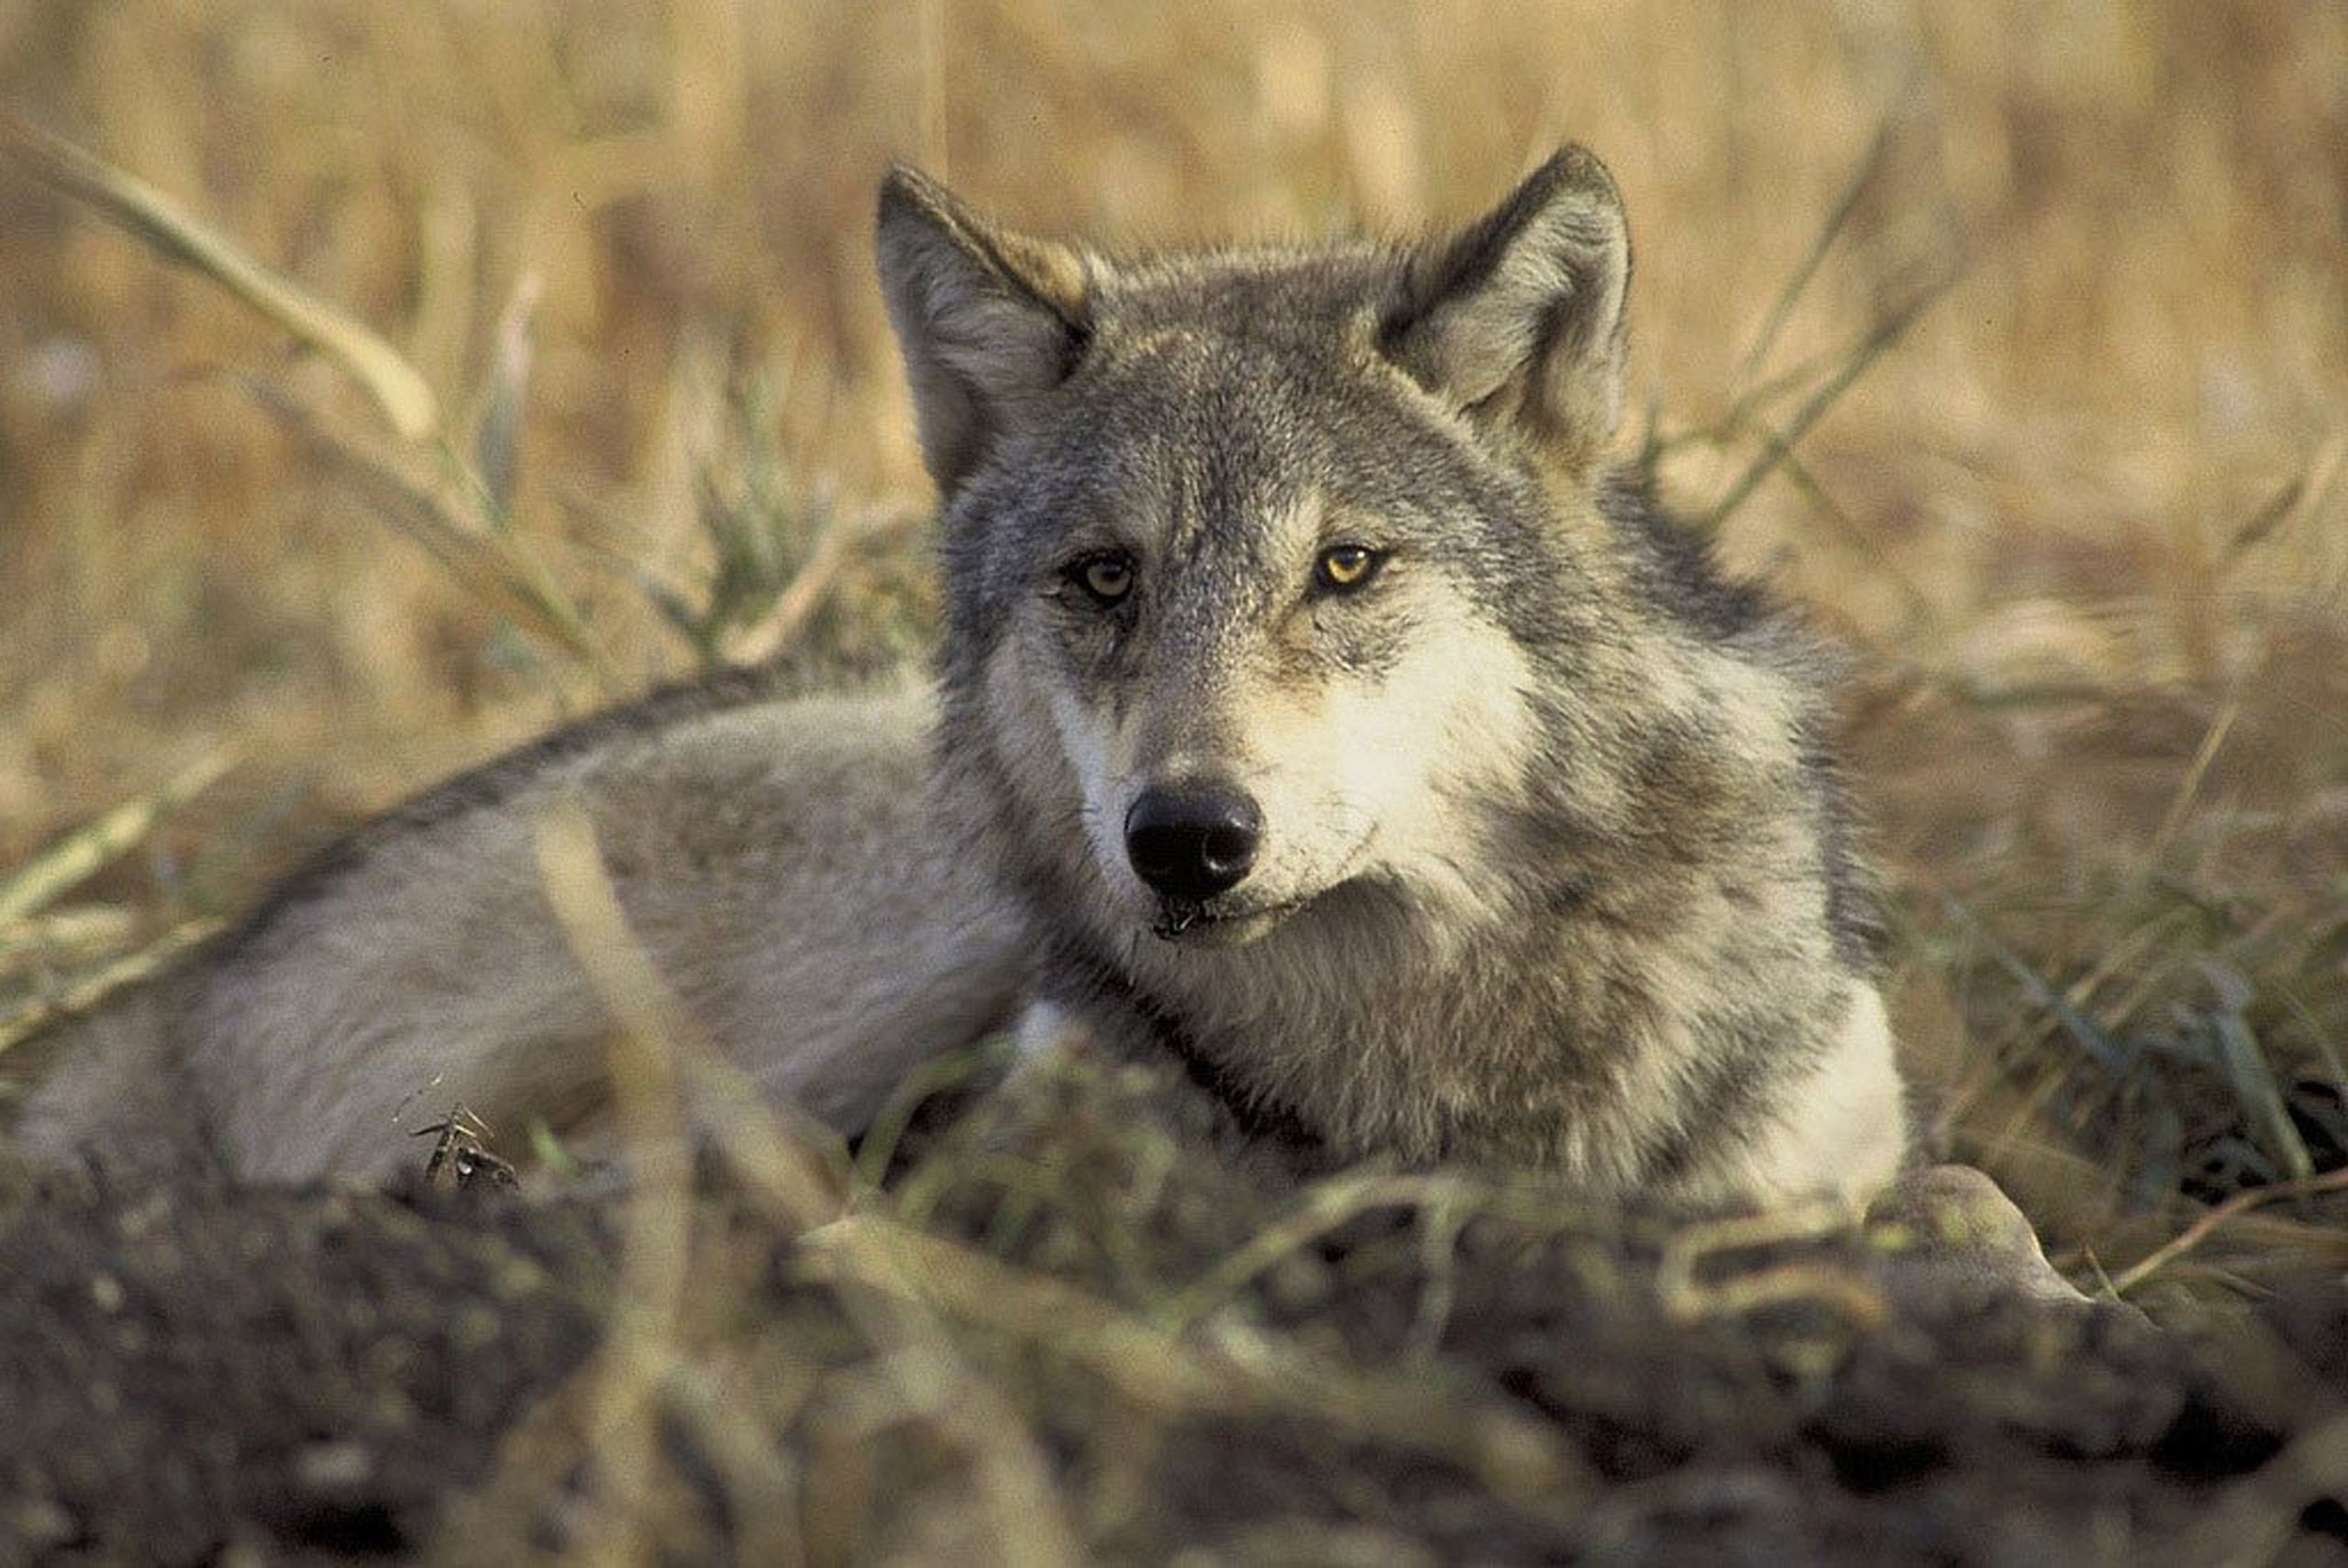 A handout photo of an endangered gray wolf from the U.S. Fish and Wildlife Service